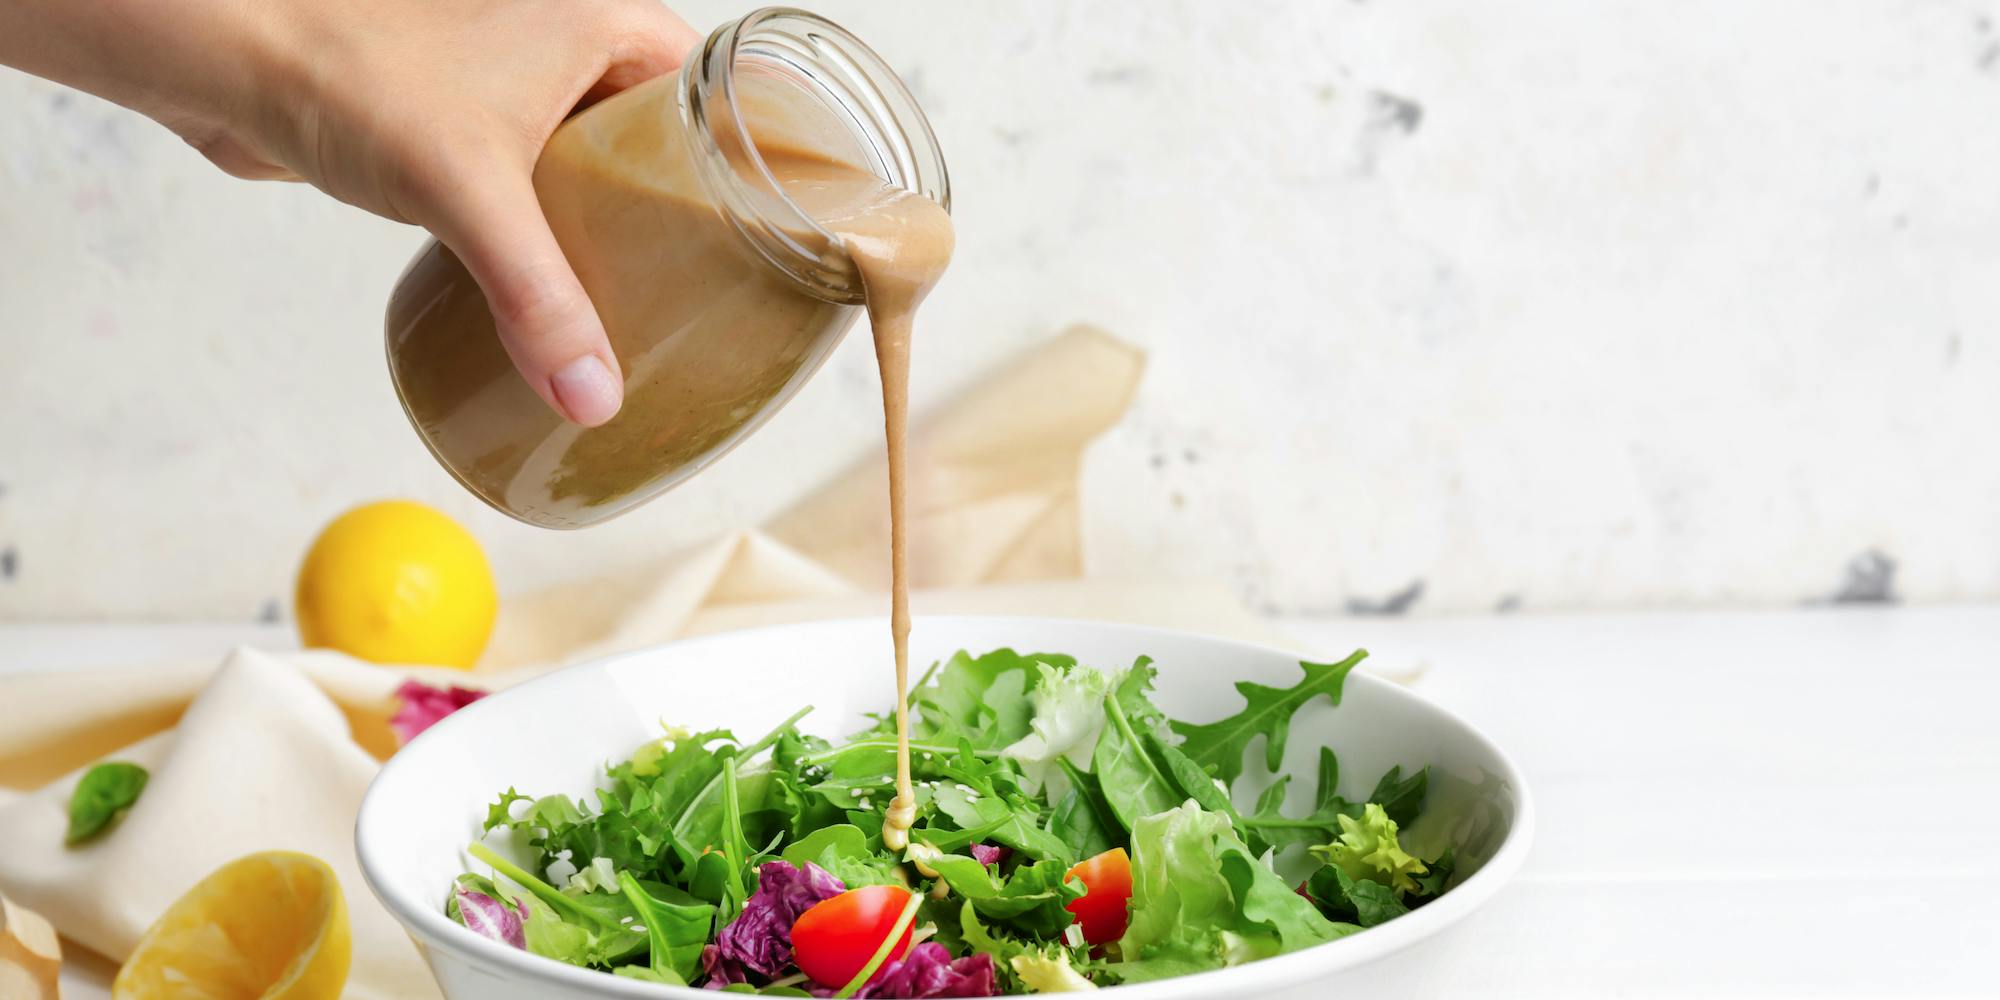 woman pouring salad dressing on a salad